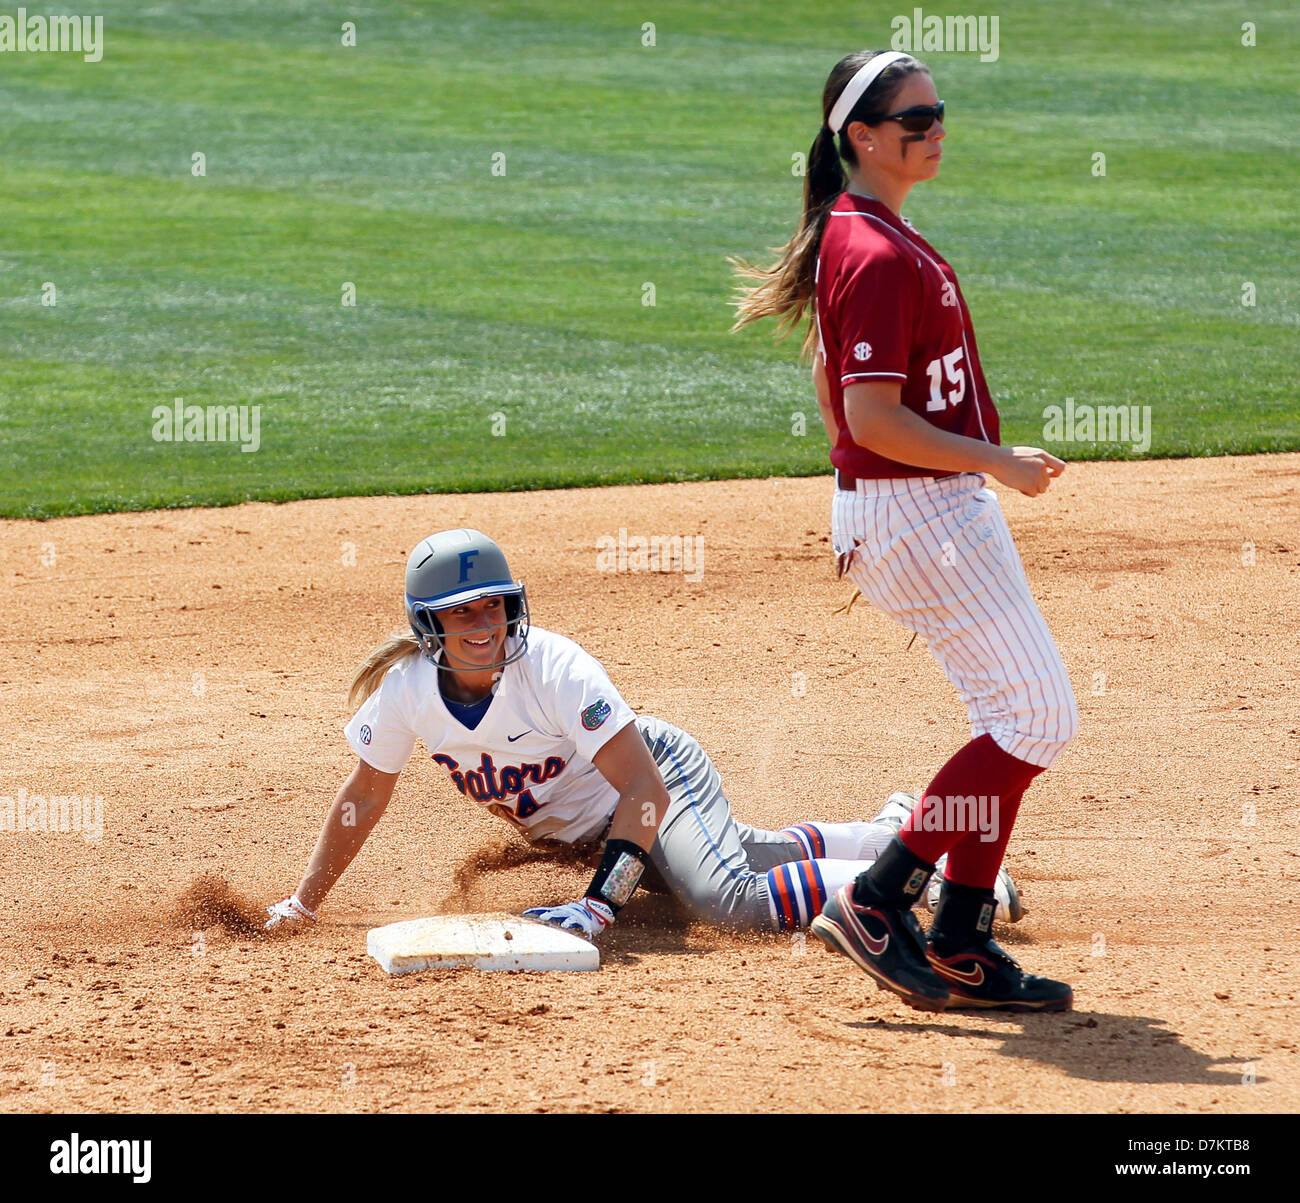 May 9, 2013 - Lexington, KY, USA - Florida's 24- Kirsti Merritt smiled after stealing second base in the bottom of the 3rd inning as Alabama's 15- Danae Hayes waited for the throw as The University of Florida played the University of Alabama in the SEC Softball tournament played at John Cropp Stadium on the UK campus in Lexington, Ky. Thursday May 9, 2013. Florida is the No. 1 seed and Alabama is No. 8 seed having advanced by defeating Texas A&M last last night.  Florida defeated Alabama 8-4. Photo by Charles Bertram | Staff  (Credit Image: © Lexington Herald-Leader/ZUMAPRESS.com) Stock Photo